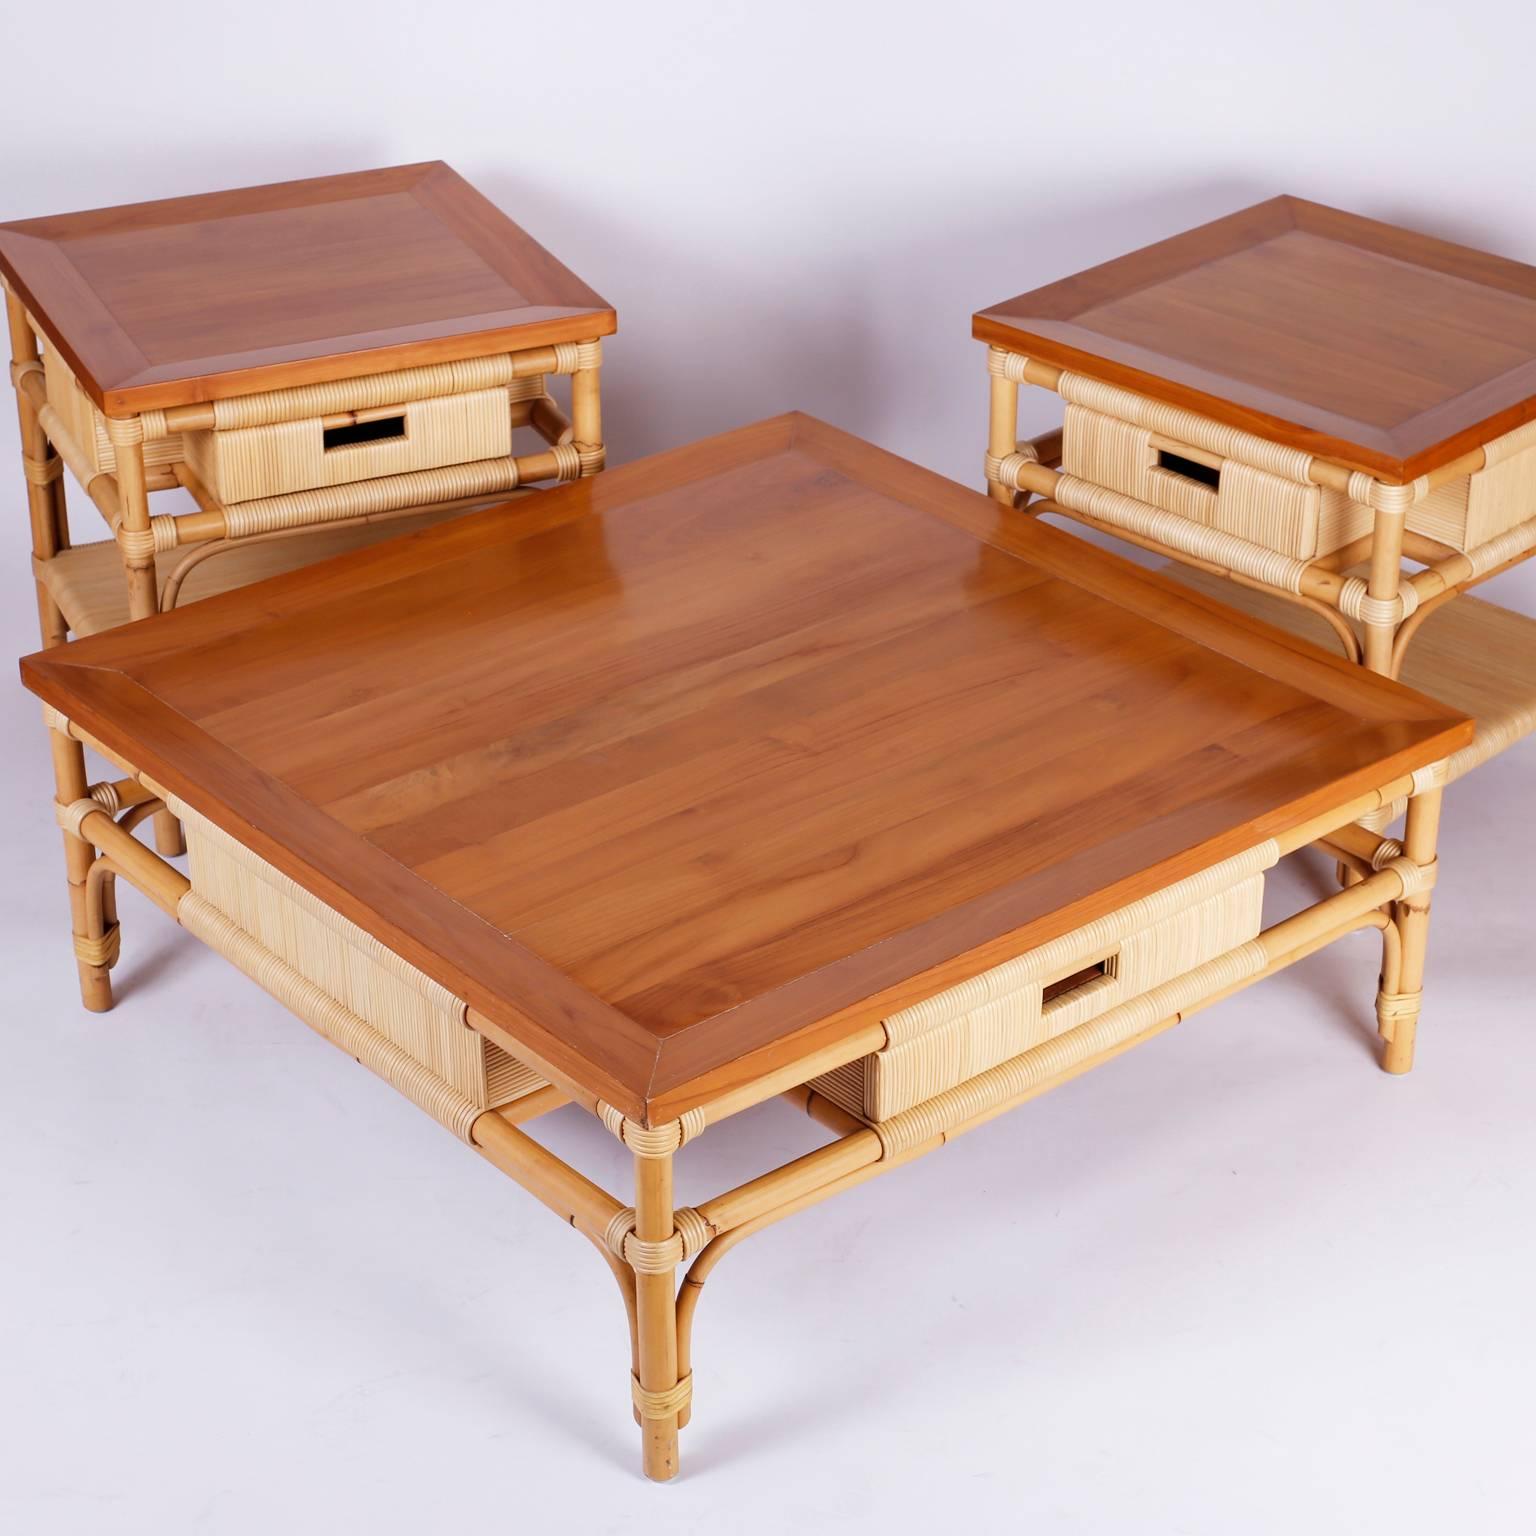 Dapper large square coffee or cocktail table with a cross banded poplar top over a bamboo frame wrapped with reed, finished all around with a drawer on two sides. Highest quality with a dynamic casual, elegant form. Branded Donghia at the bottom.